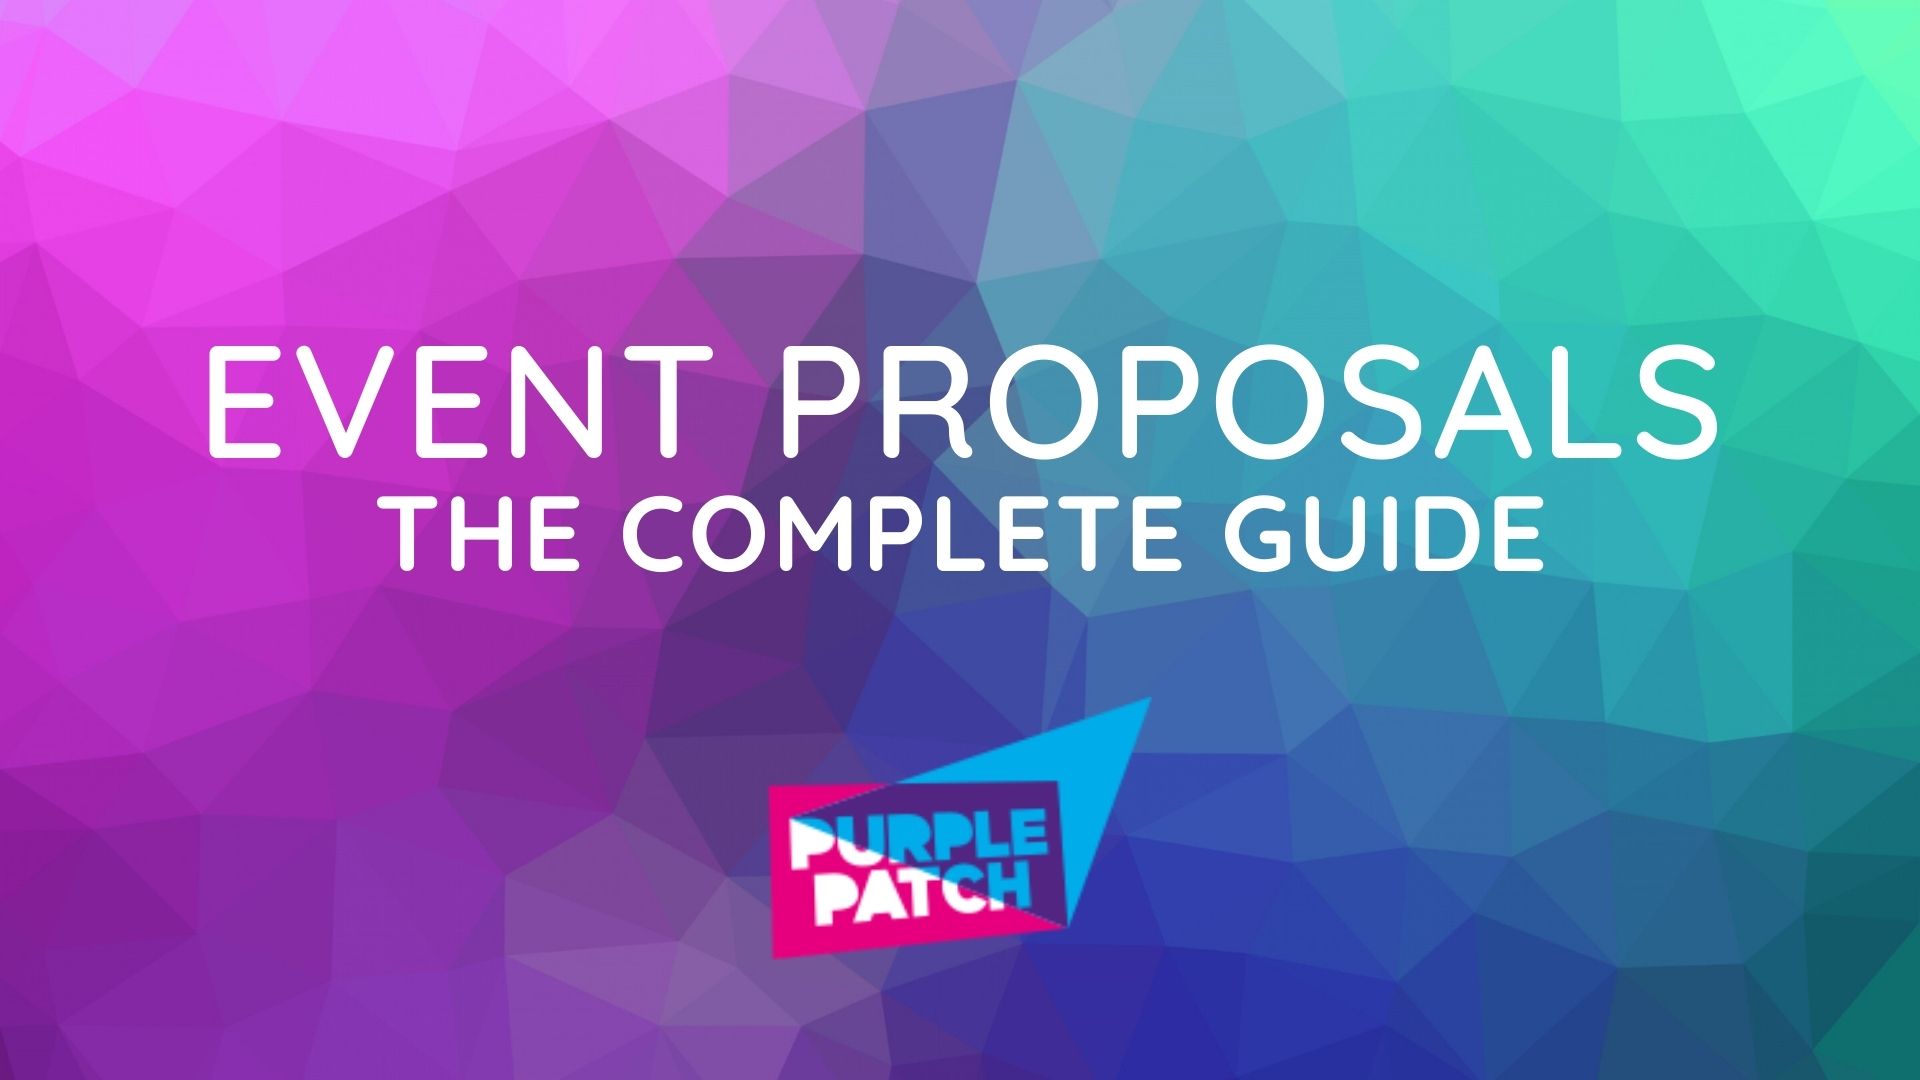 Event Proposals: The Complete Guide